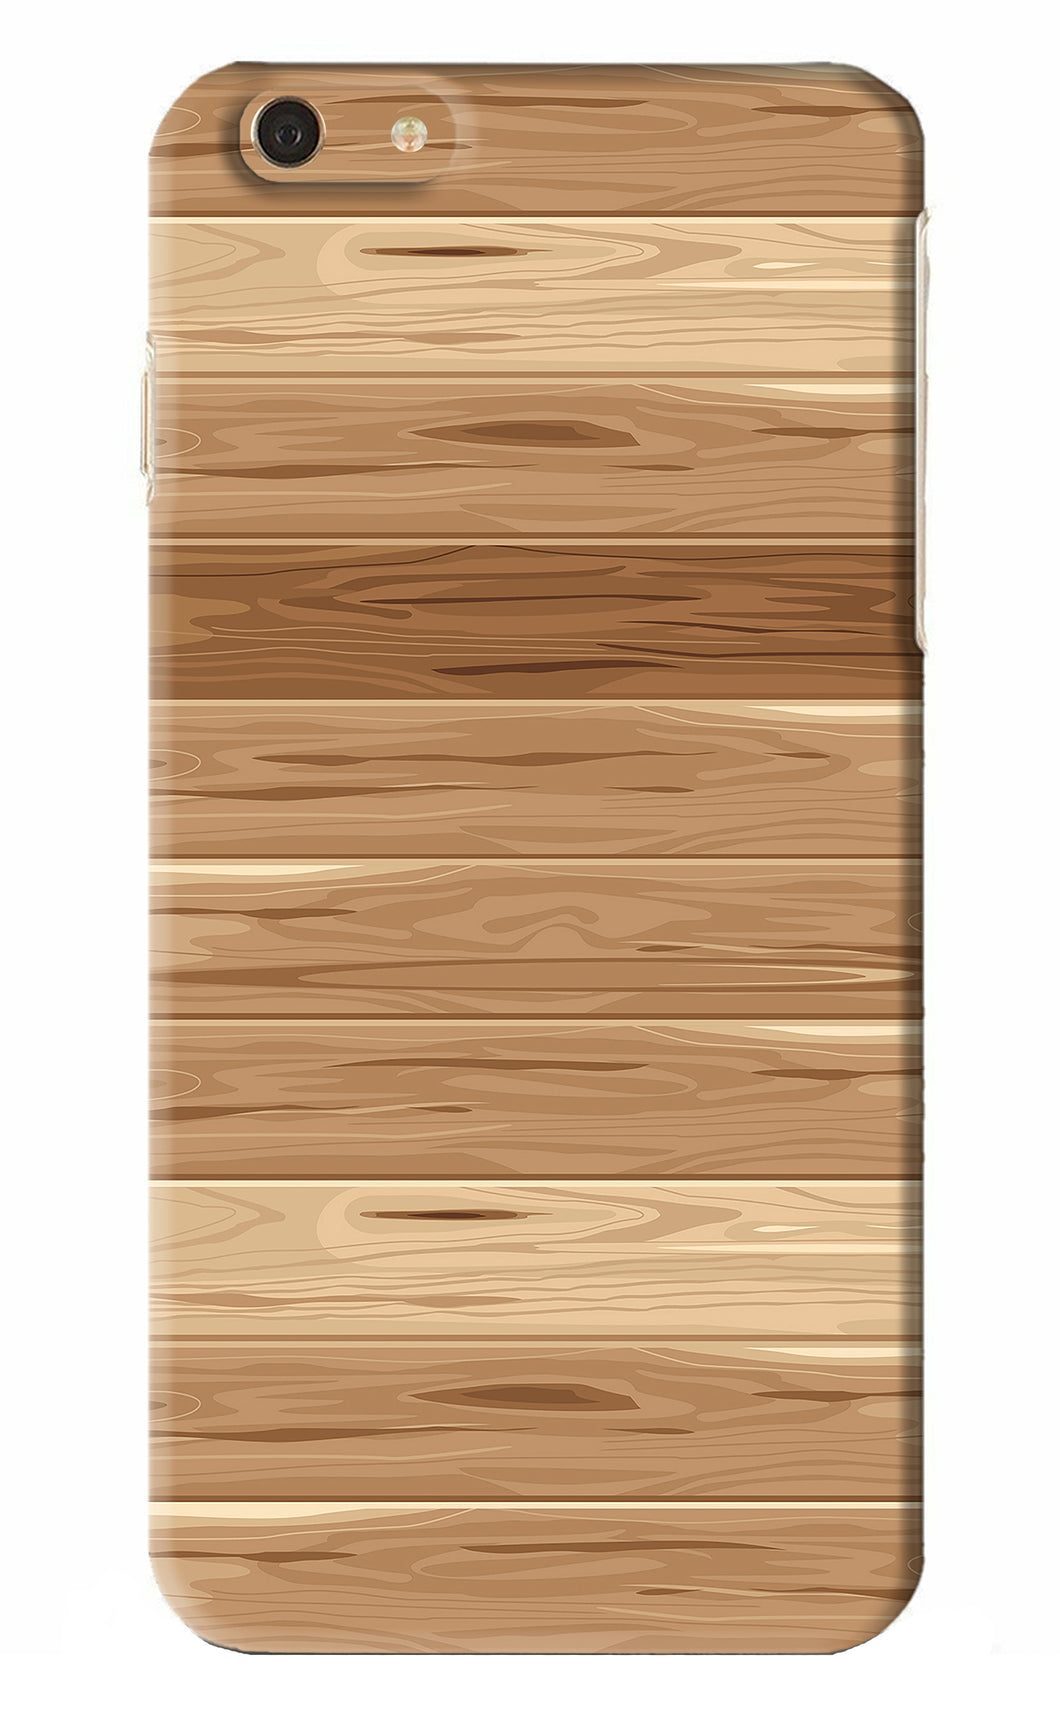 Wooden Vector iPhone 6 Plus Back Skin Wrap